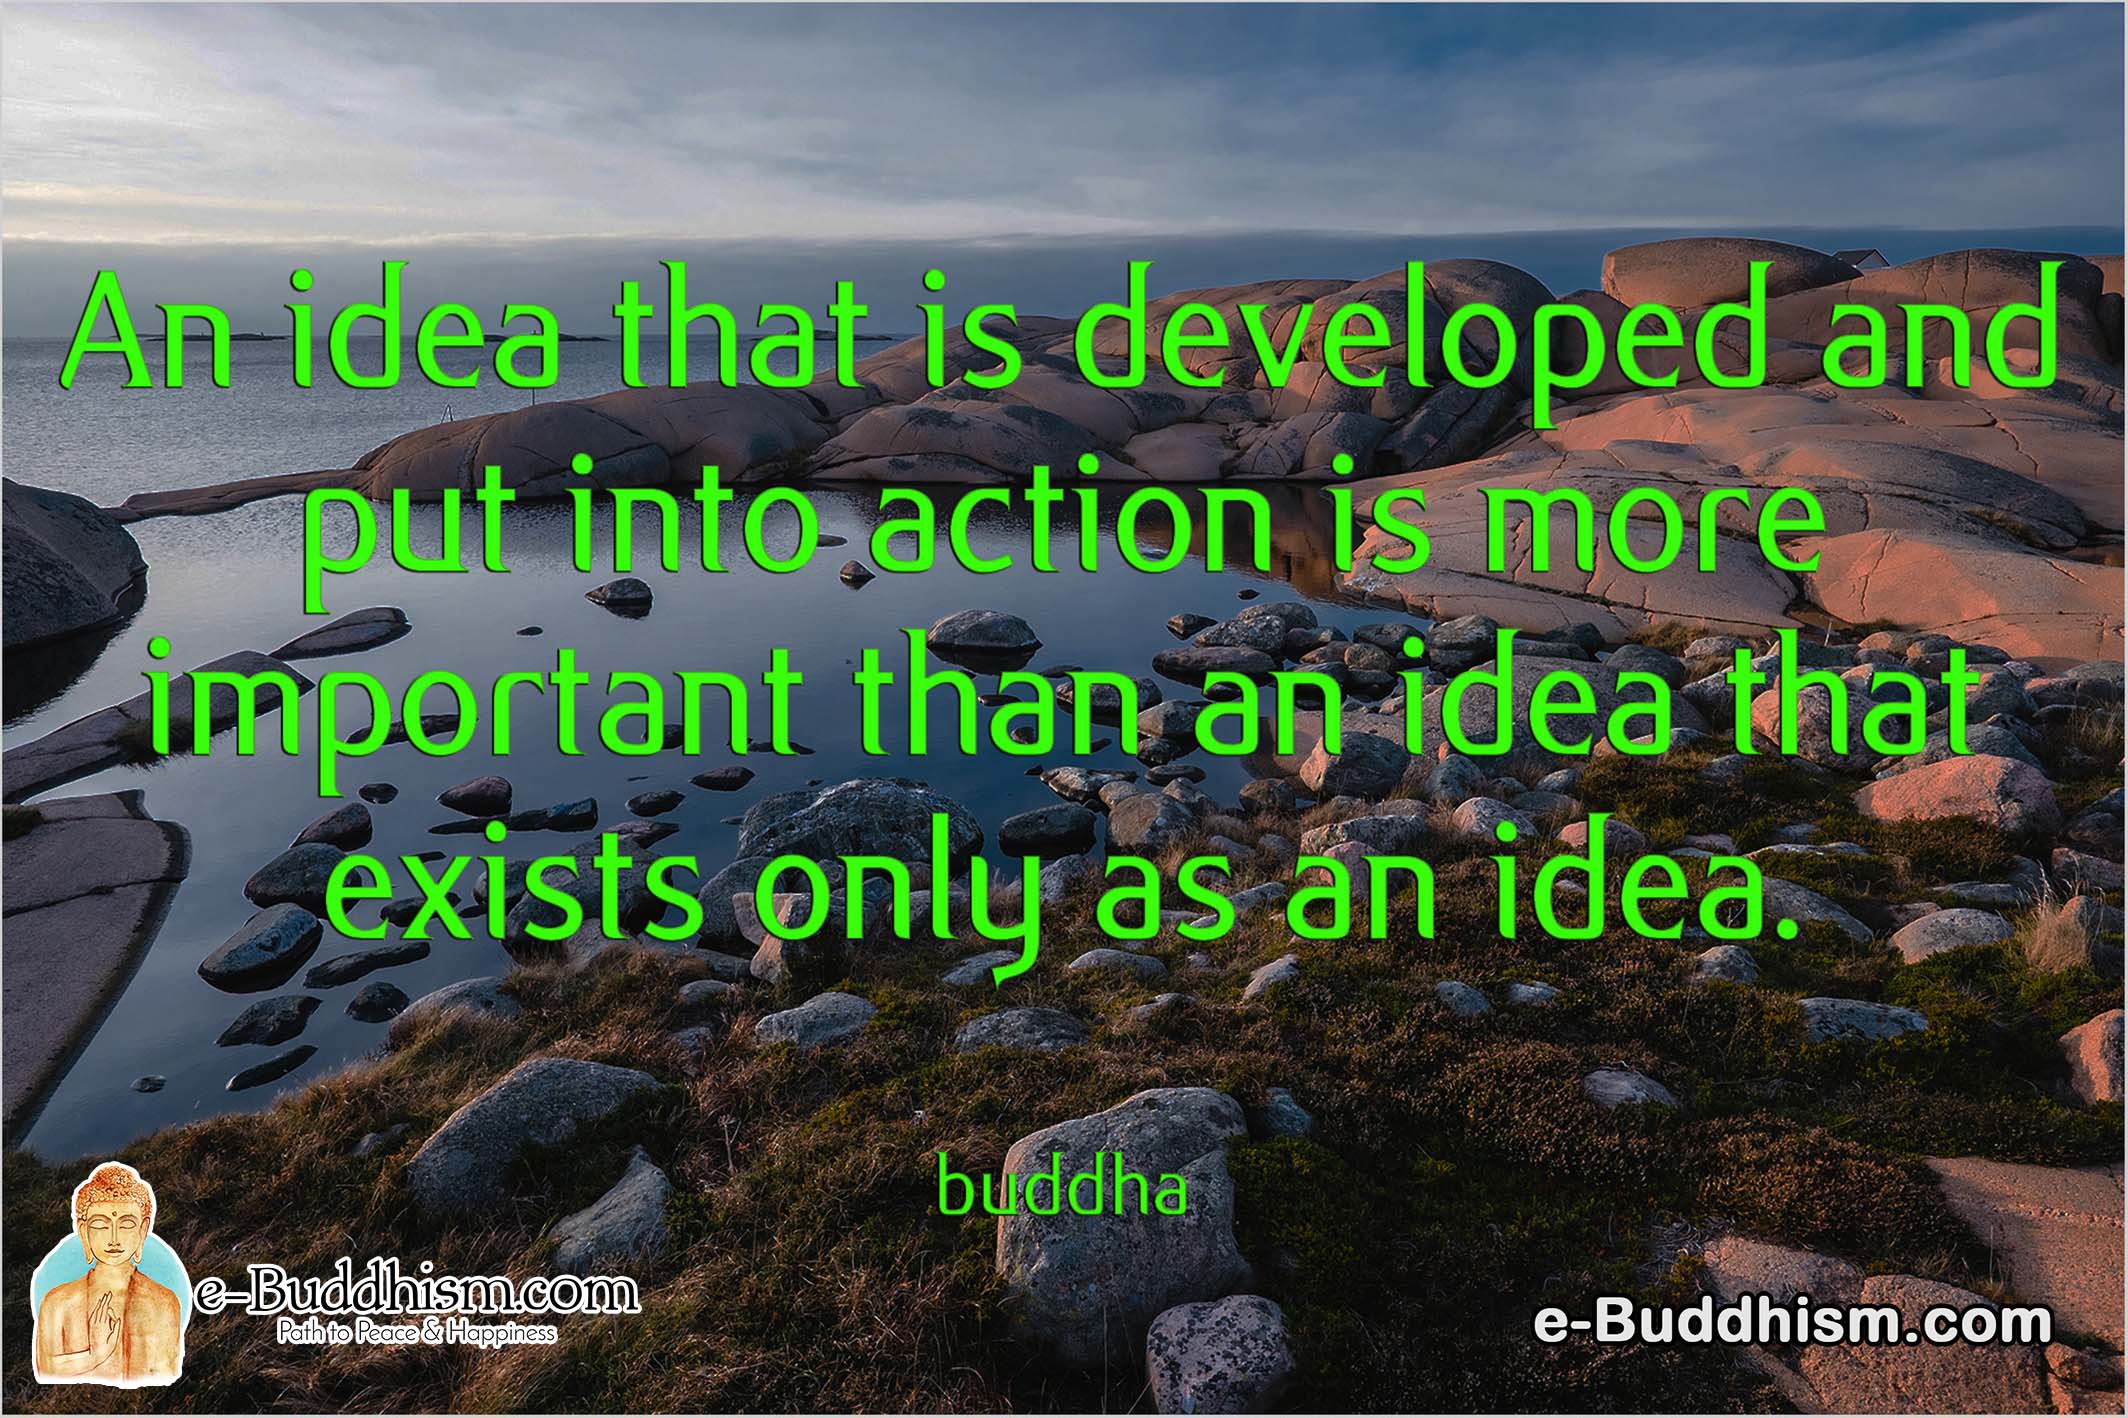 An idea that is developed and put into action is more important than an idea that exists only as an idea. -Buddha